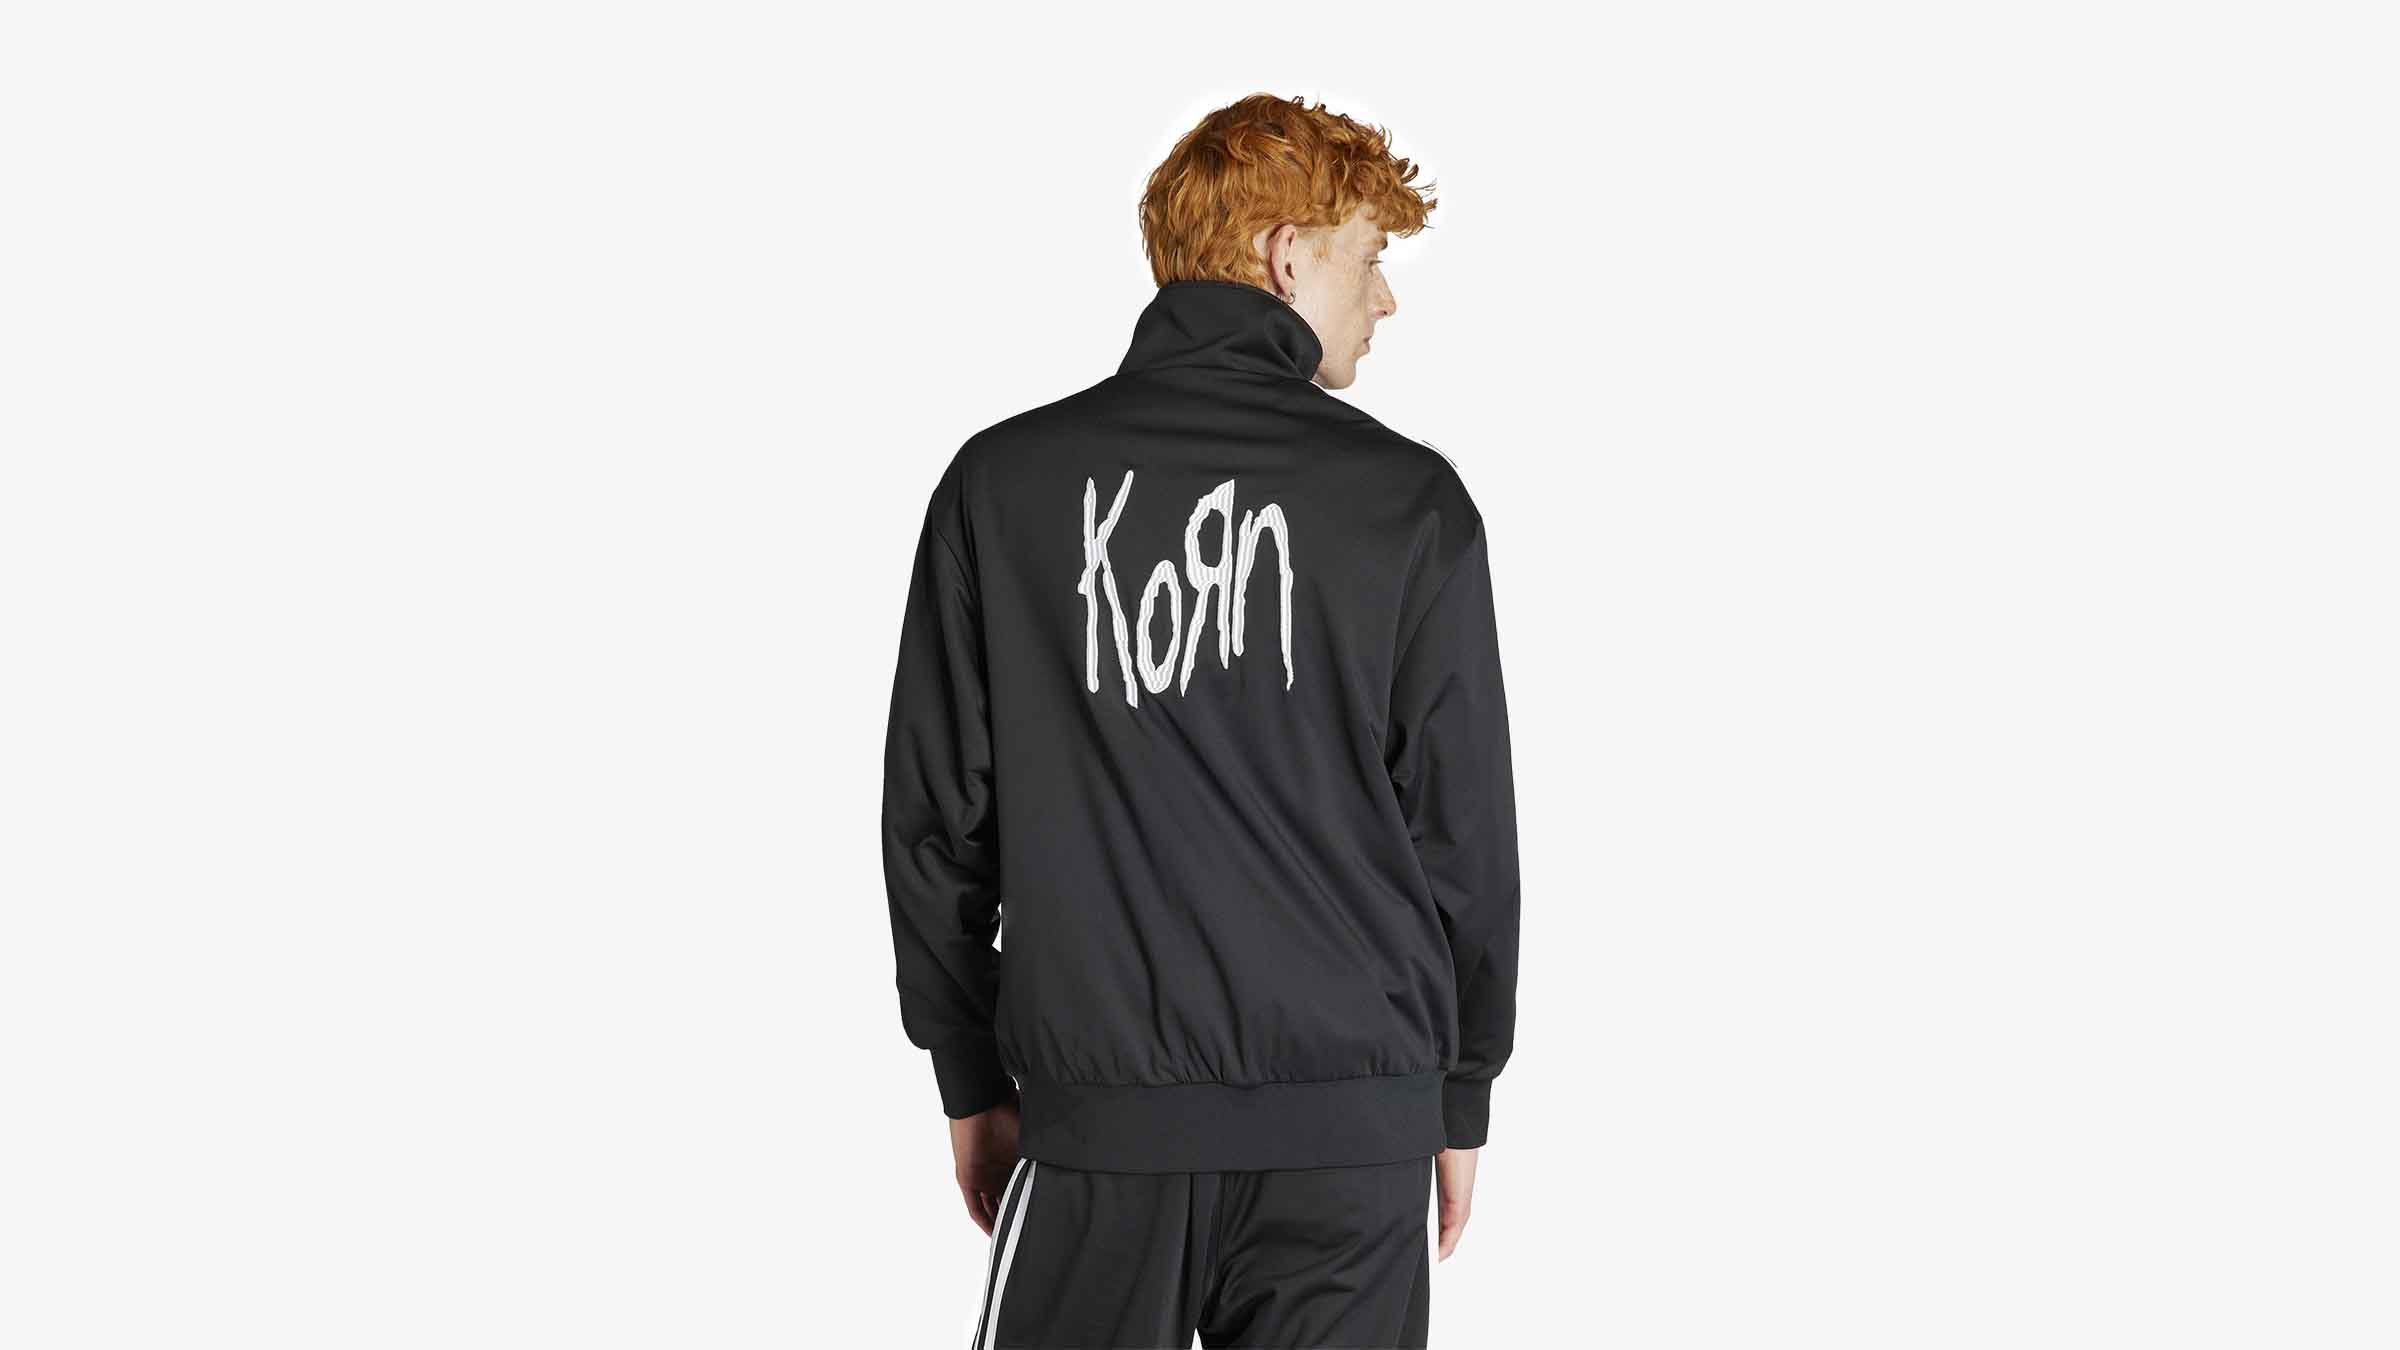 Adidas x KORN Track Top (Black) | END. Launches